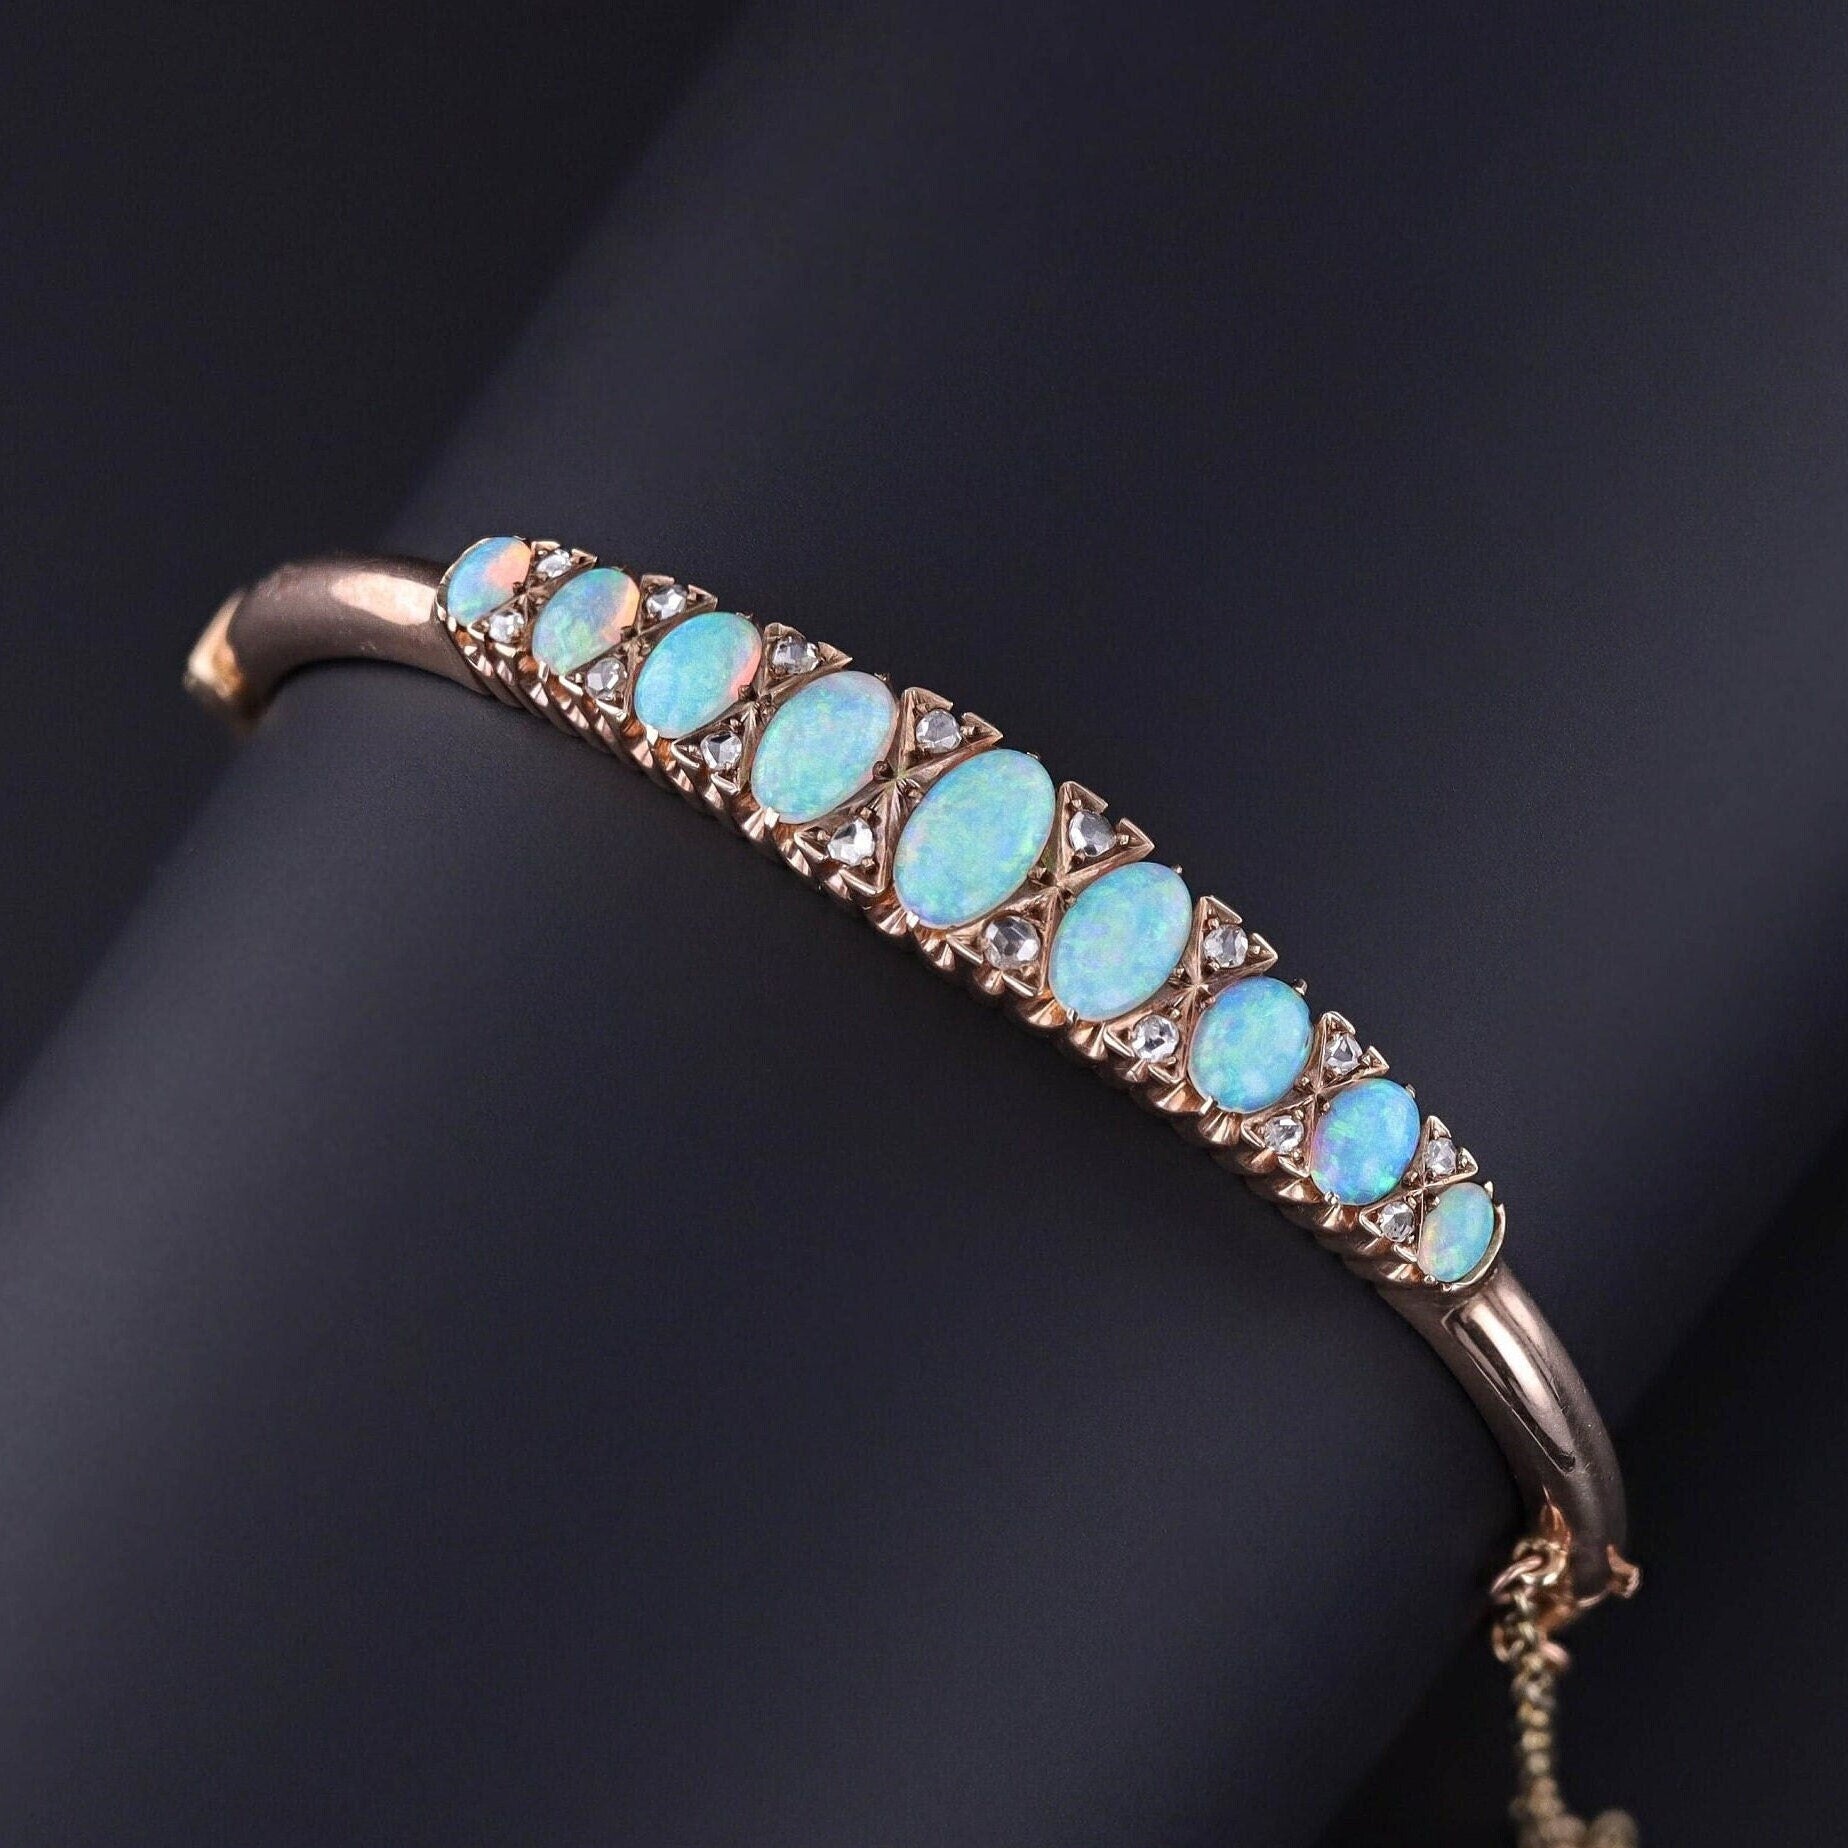 Antique Opal and Diamond Bangle of 9ct Gold